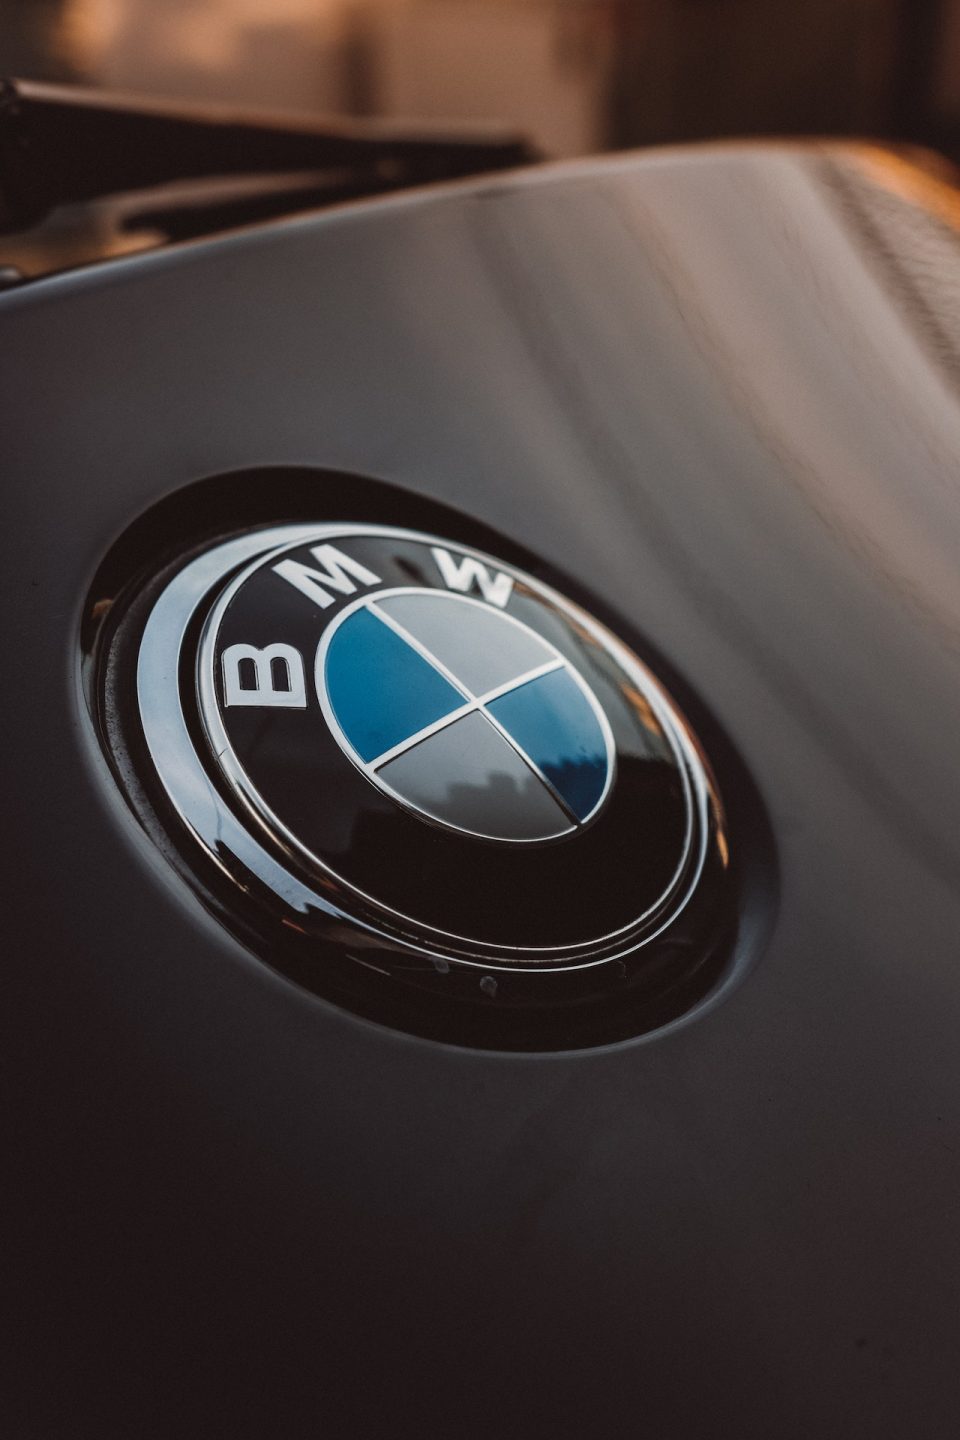 BMW hardware-based features